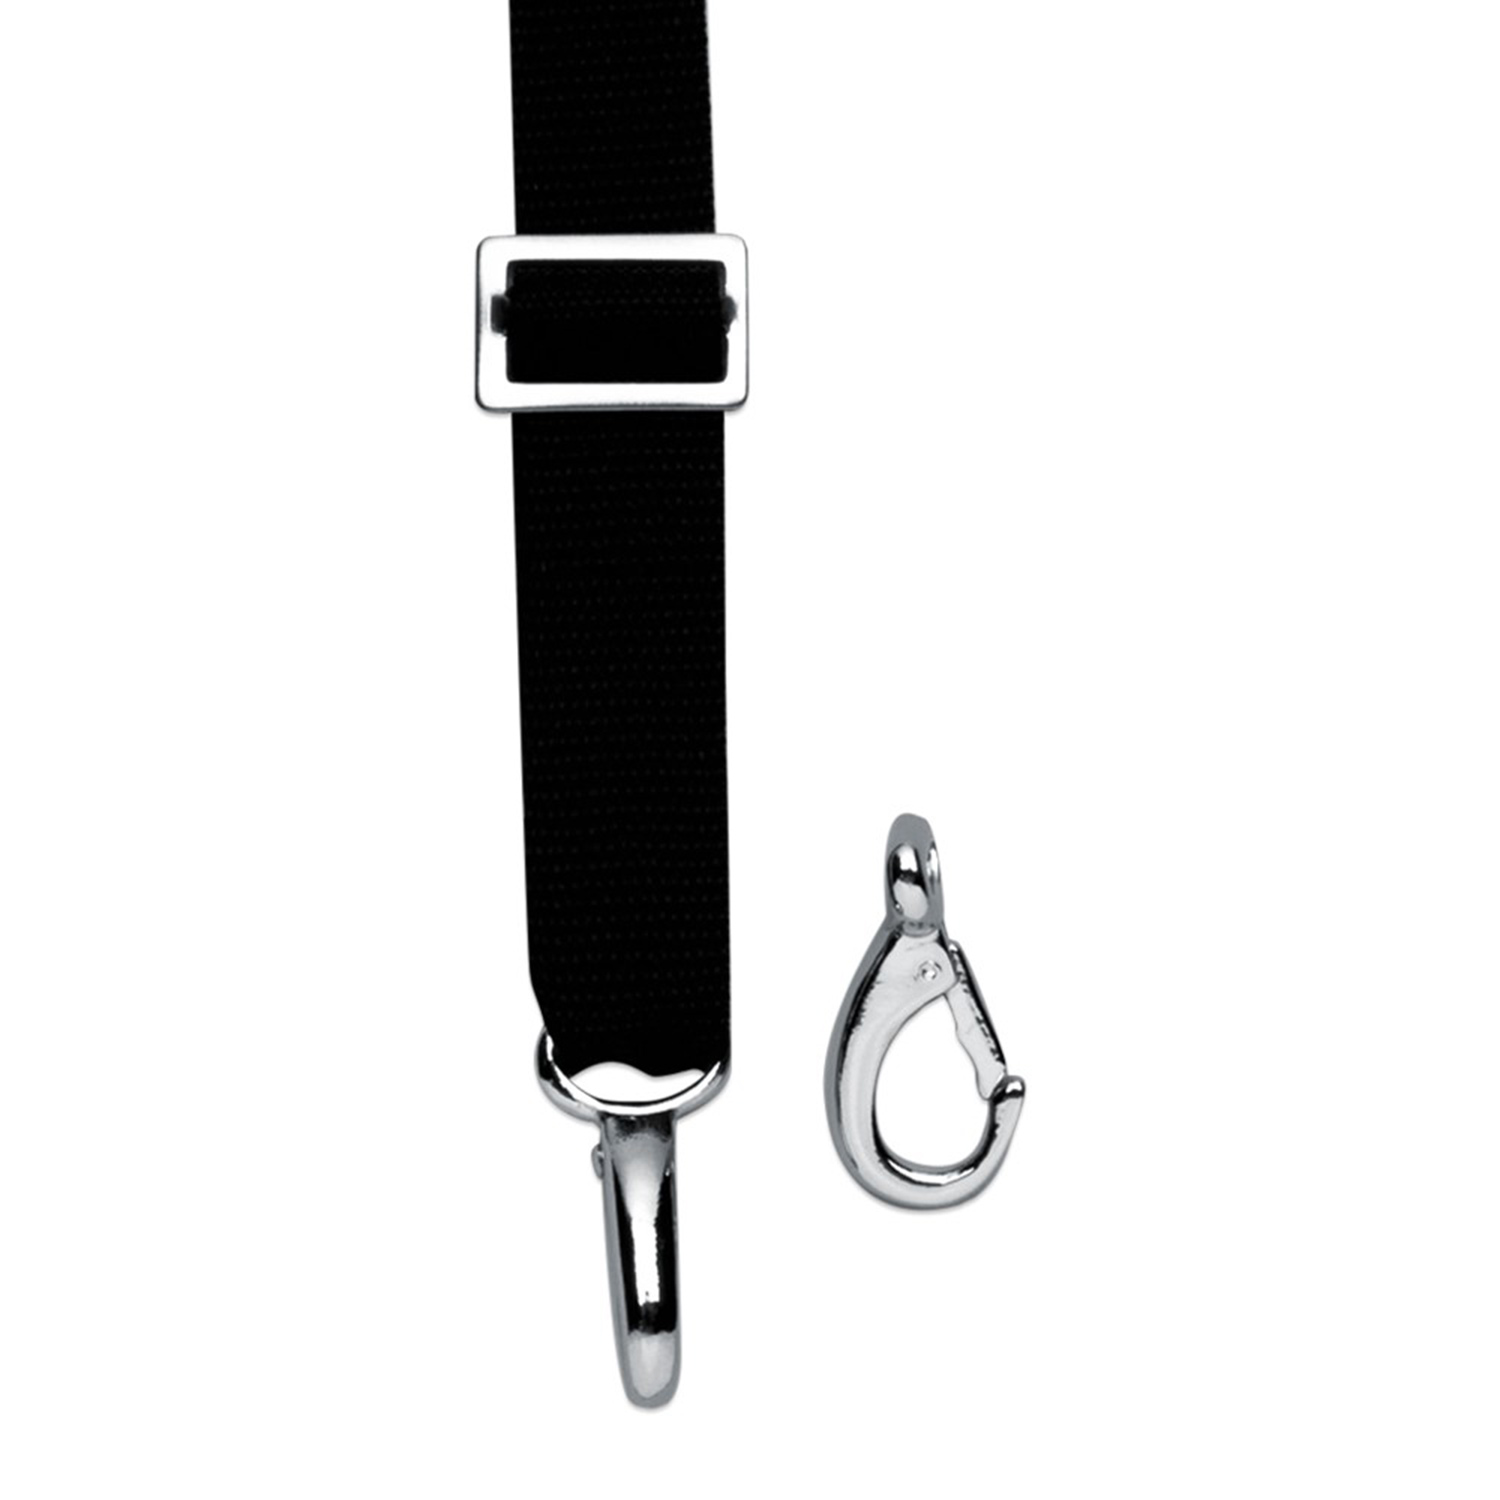 CARVER Bimini Top 60 Replacement Hold-Down Straps with Single Snap Hook,  Set of 4